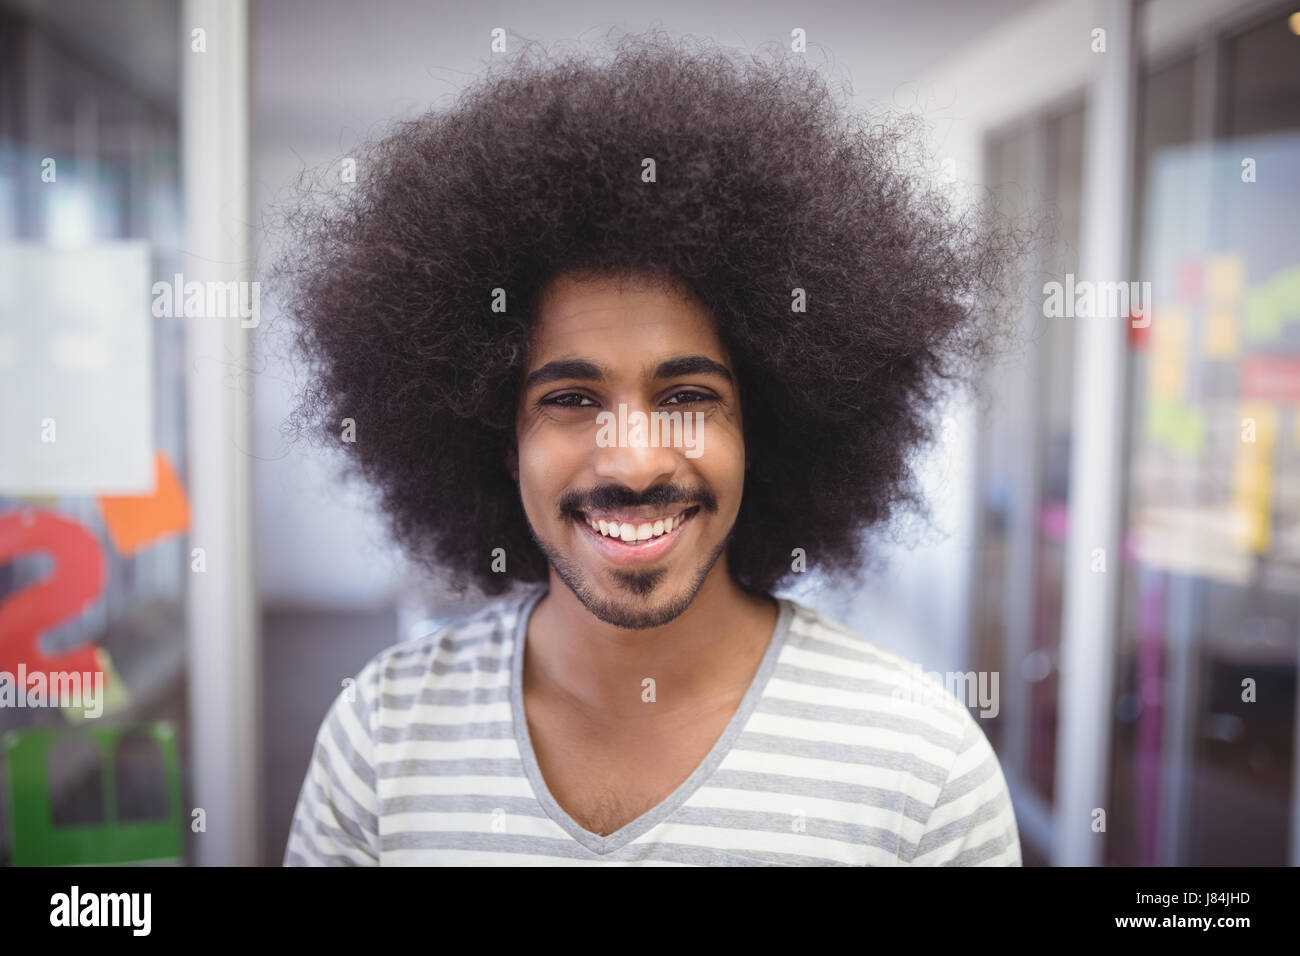 Close up portrait of smiling businessman with frizzy hair Stock Photo